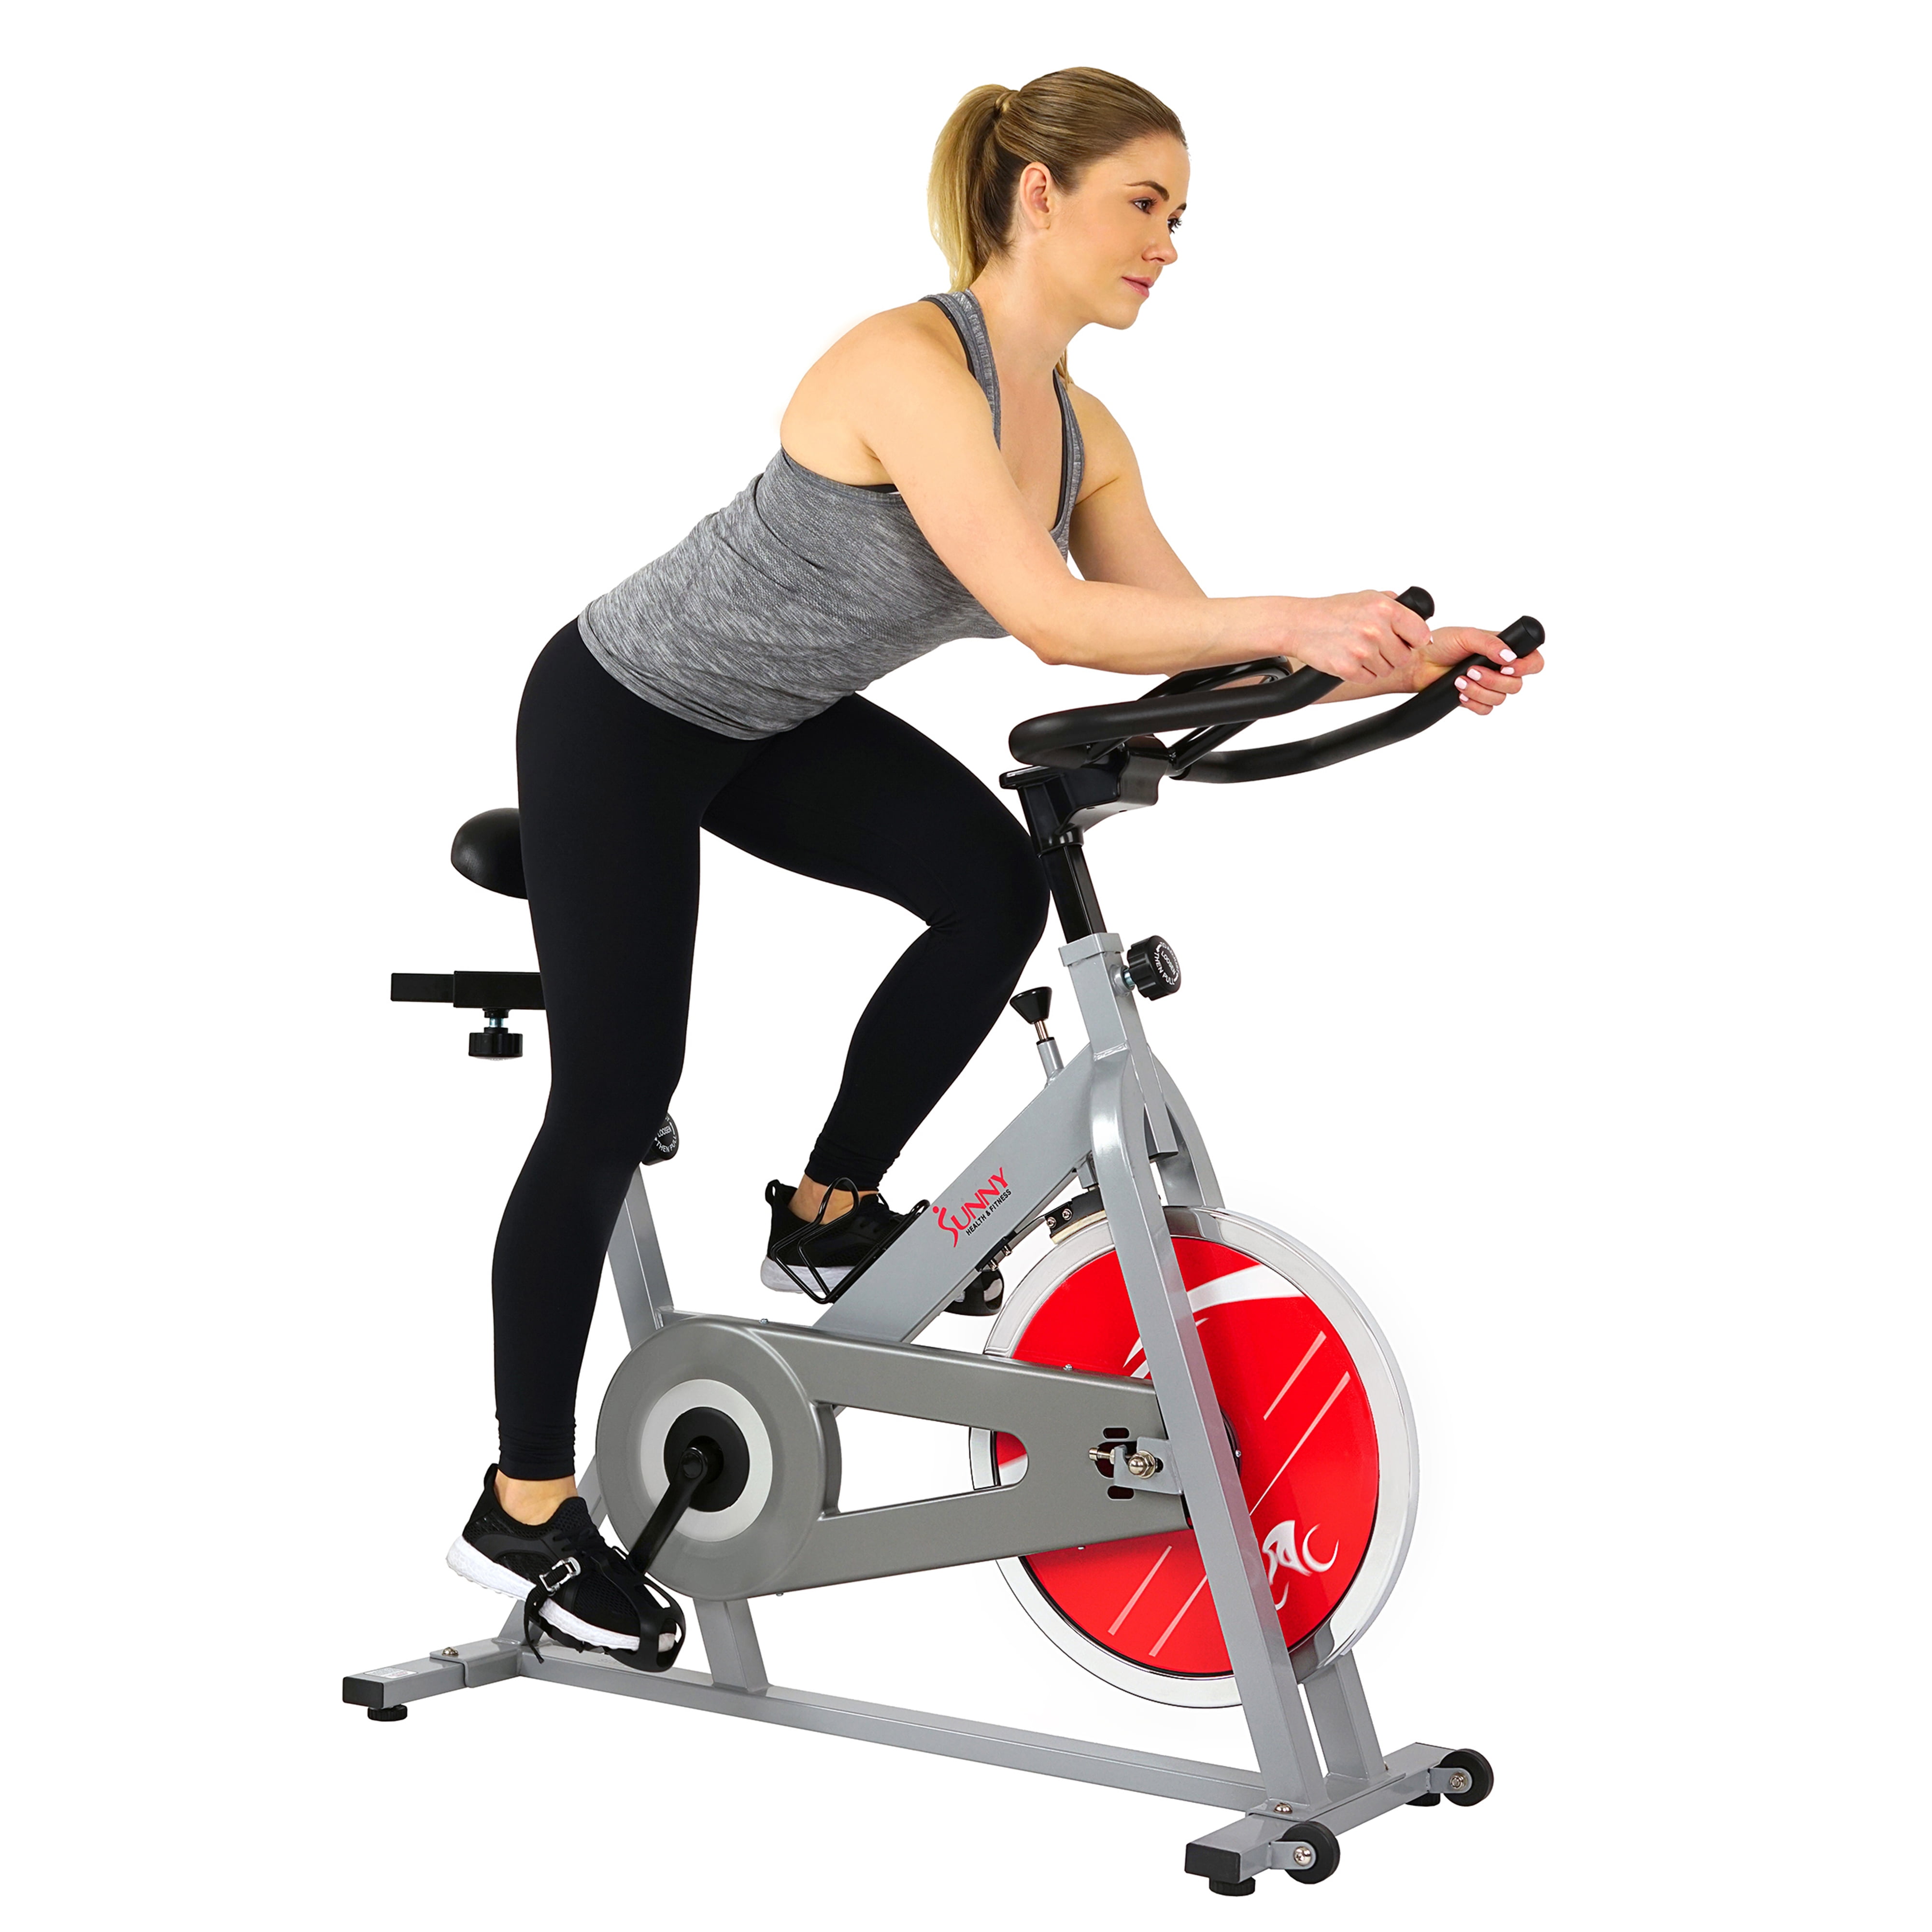 Exercise Spin Bike Home Gym Bicycle Cycling Cardio Fitness Training Workout Bike 